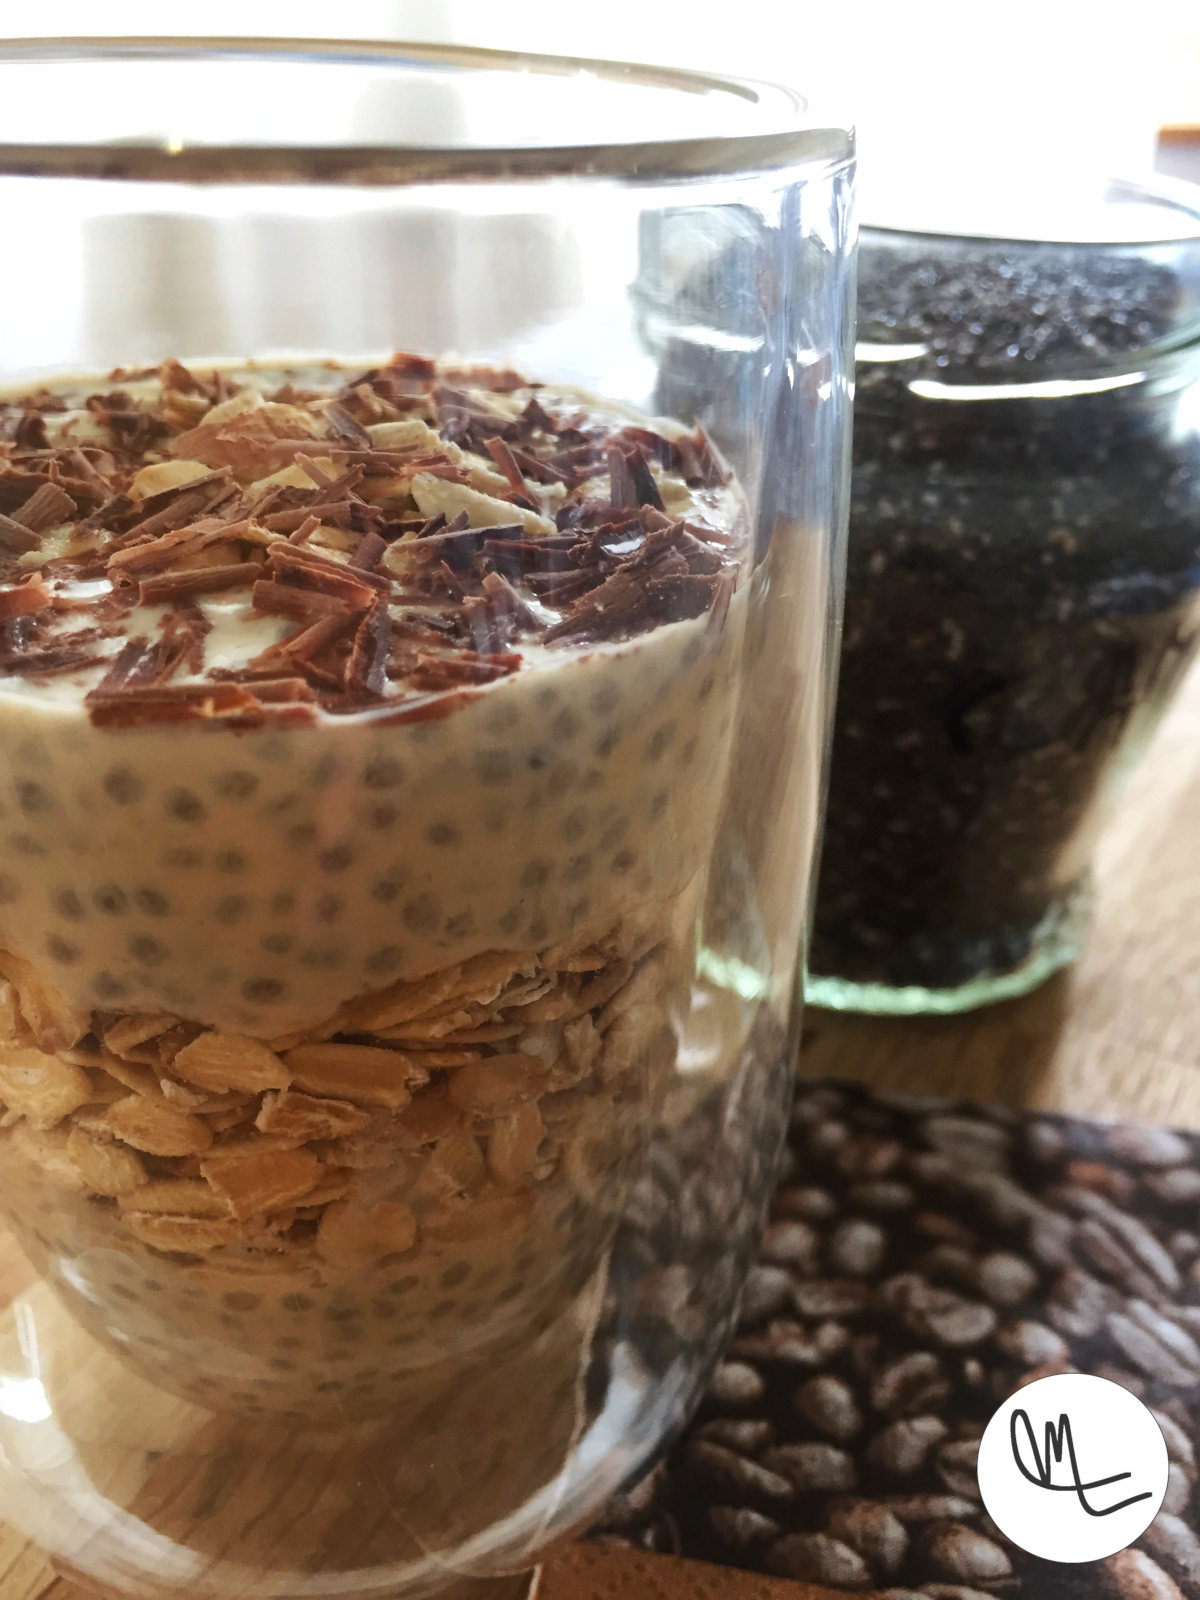 Glass with chia pudding with a layer of oats, topped with chocolate flakes, with a background of chia seeds and a napkin as a liner.